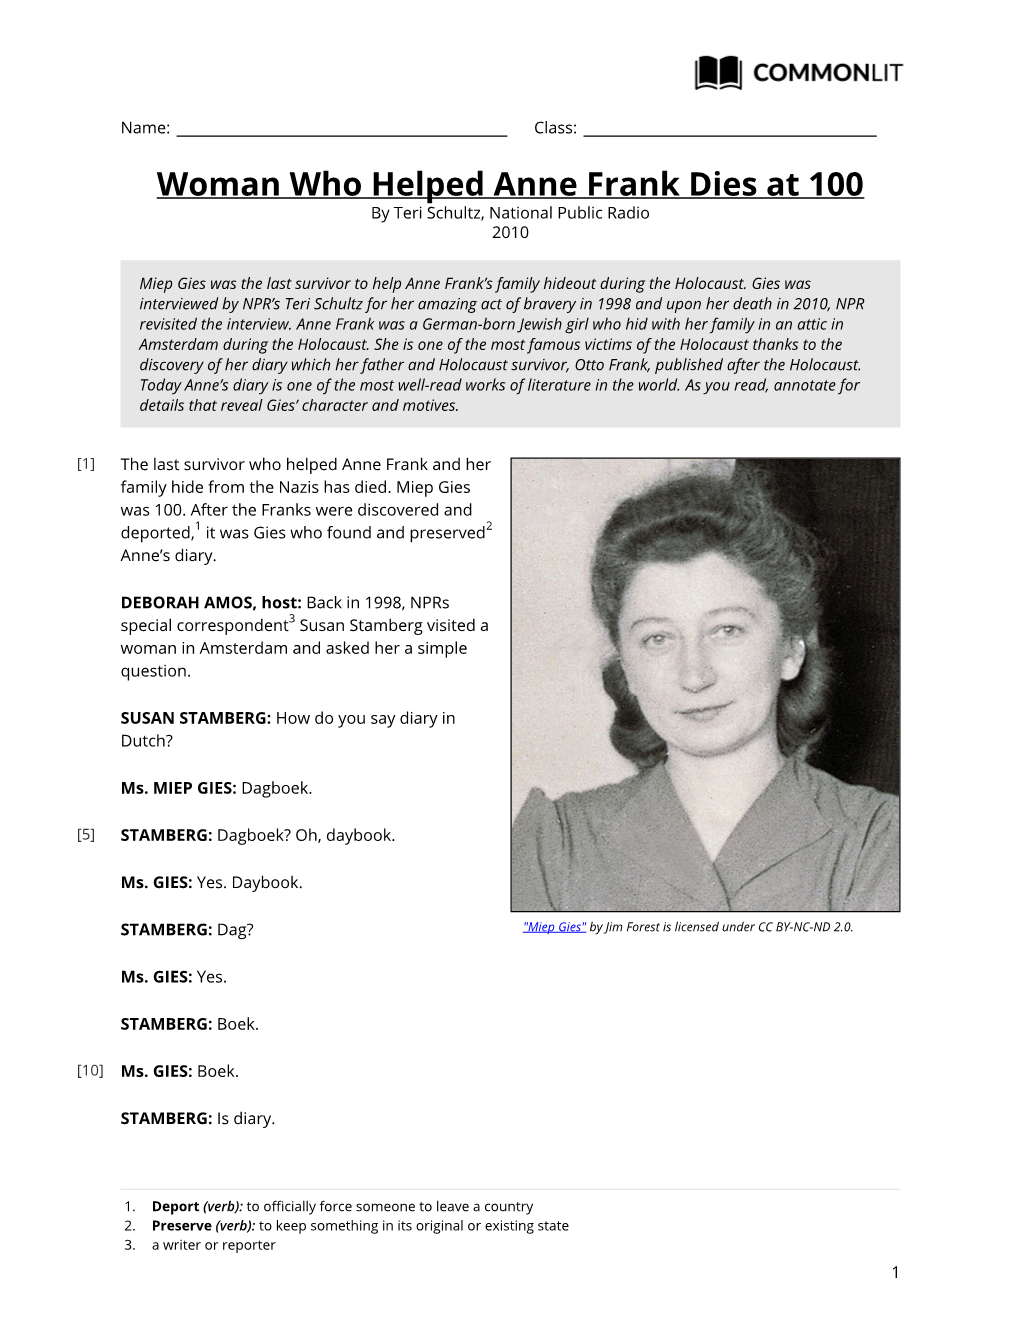 Woman Who Helped Anne Frank Dies at 100 by Teri Schultz, National Public Radio 2010